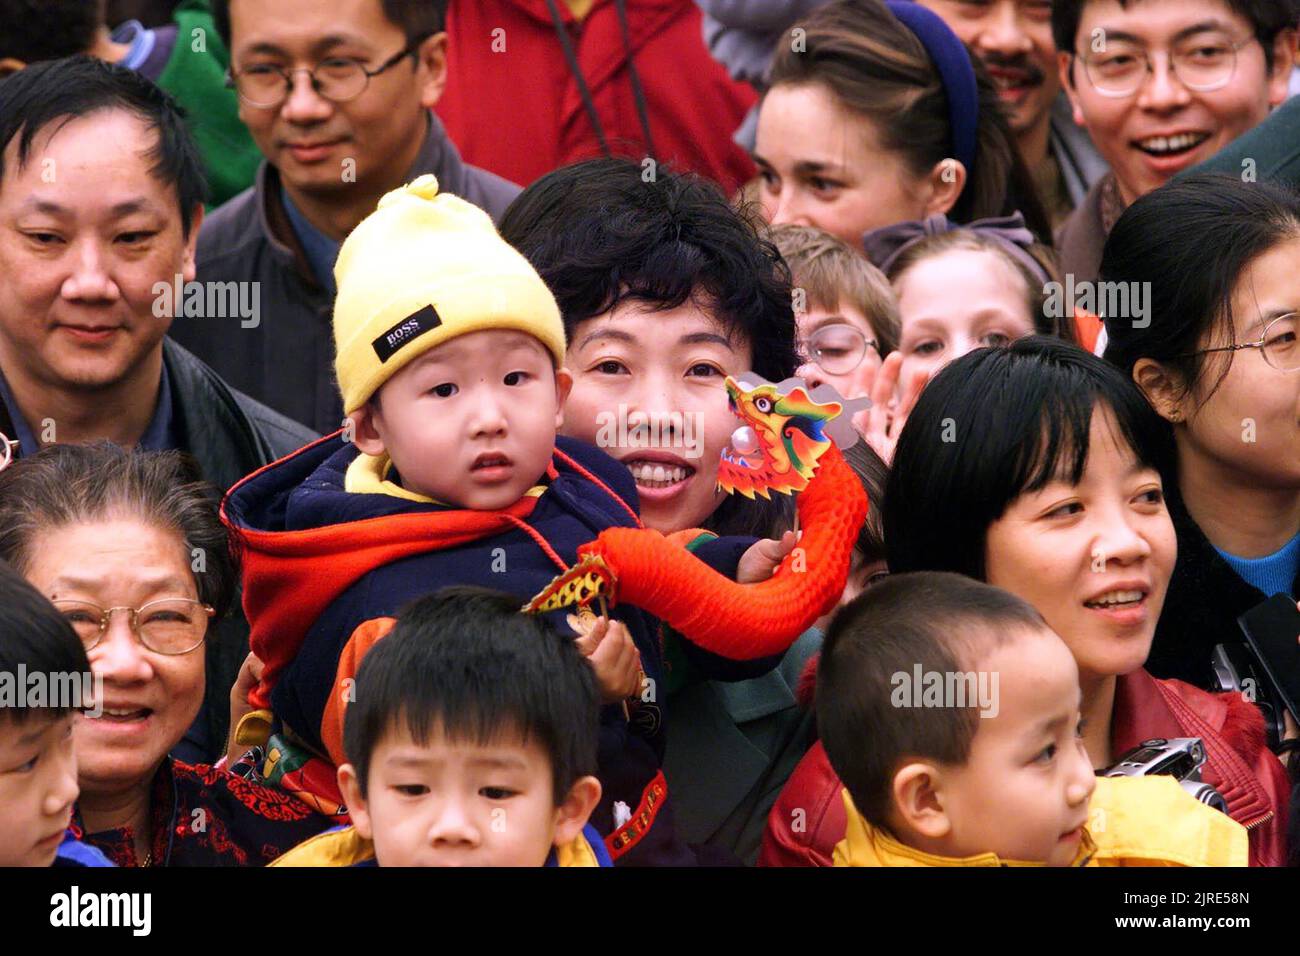 SMILING FACES IN THE CROWD IN MANCHESTERS CHINA TOWN AS THE LOCAL CHINESE COMMUNITY WELCOME THE CHINESE NEW YEAR THE YEAR OF THE GOLDEN DRAGON. MANCHESTER PICTURE GARY ROBERTS. Stock Photo